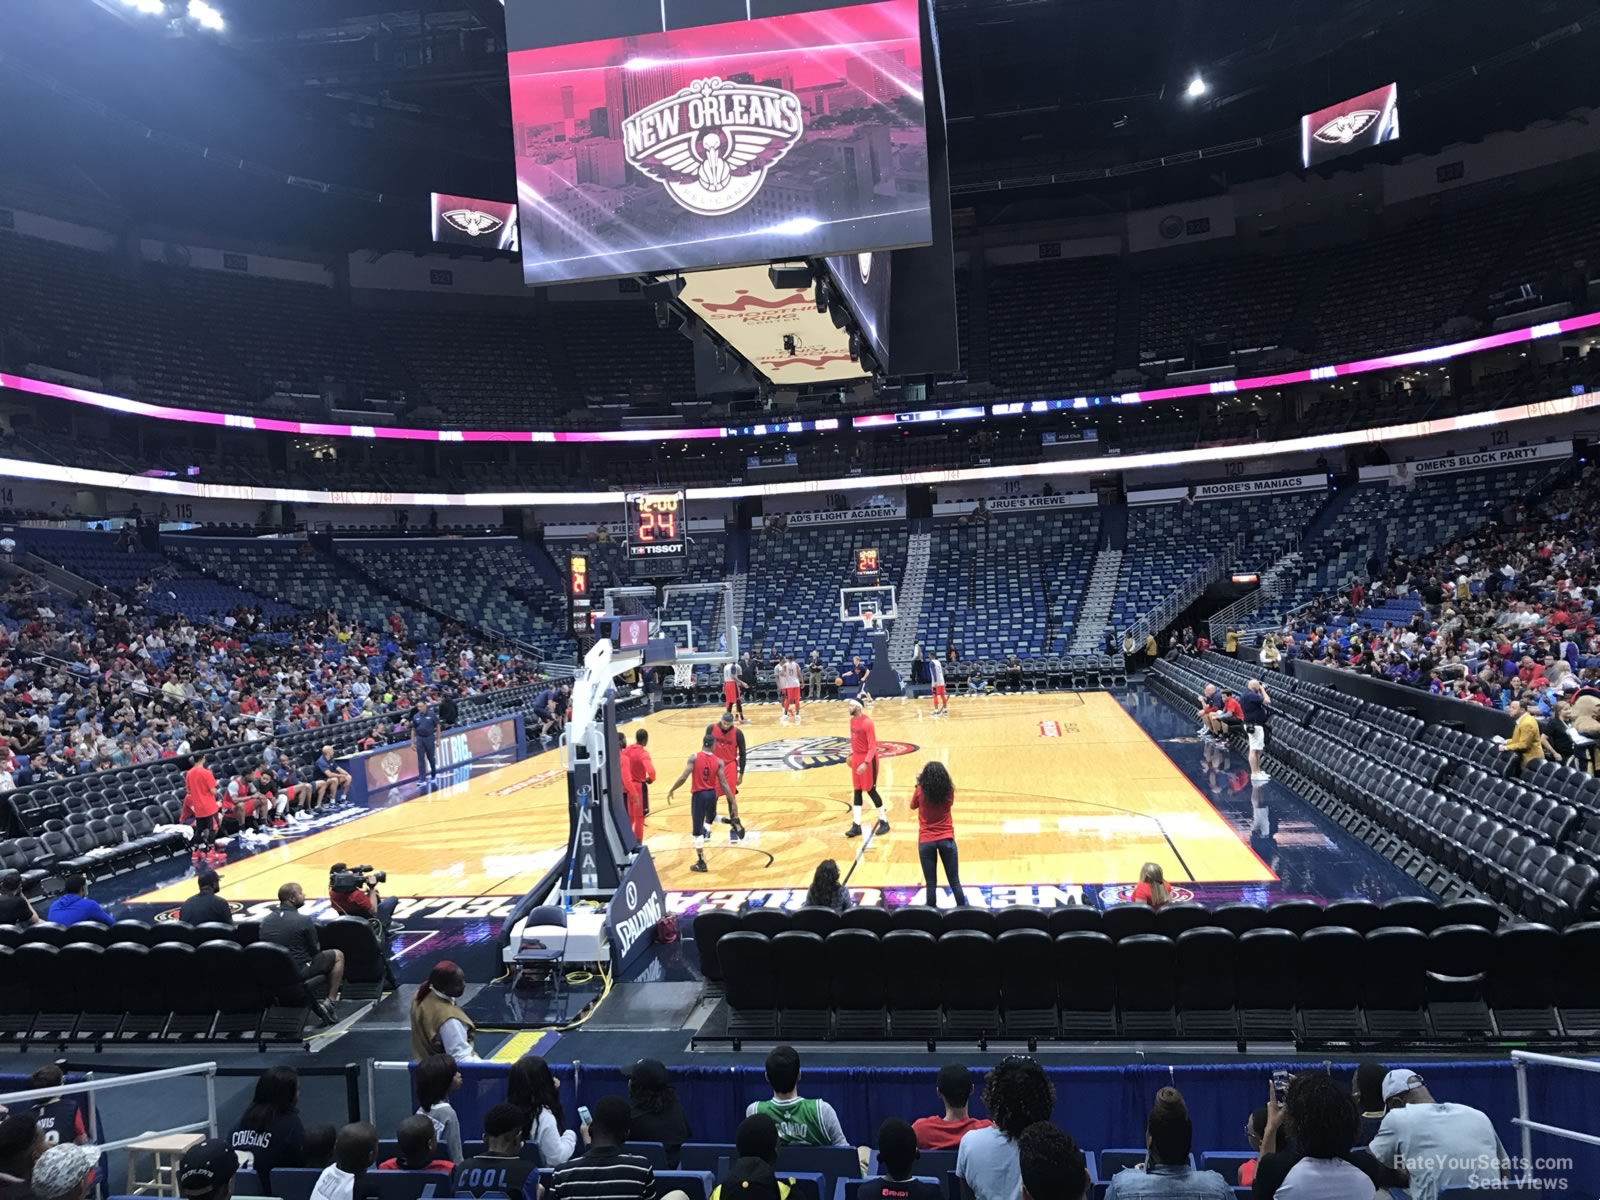 section 106, row 9 seat view  for basketball - smoothie king center